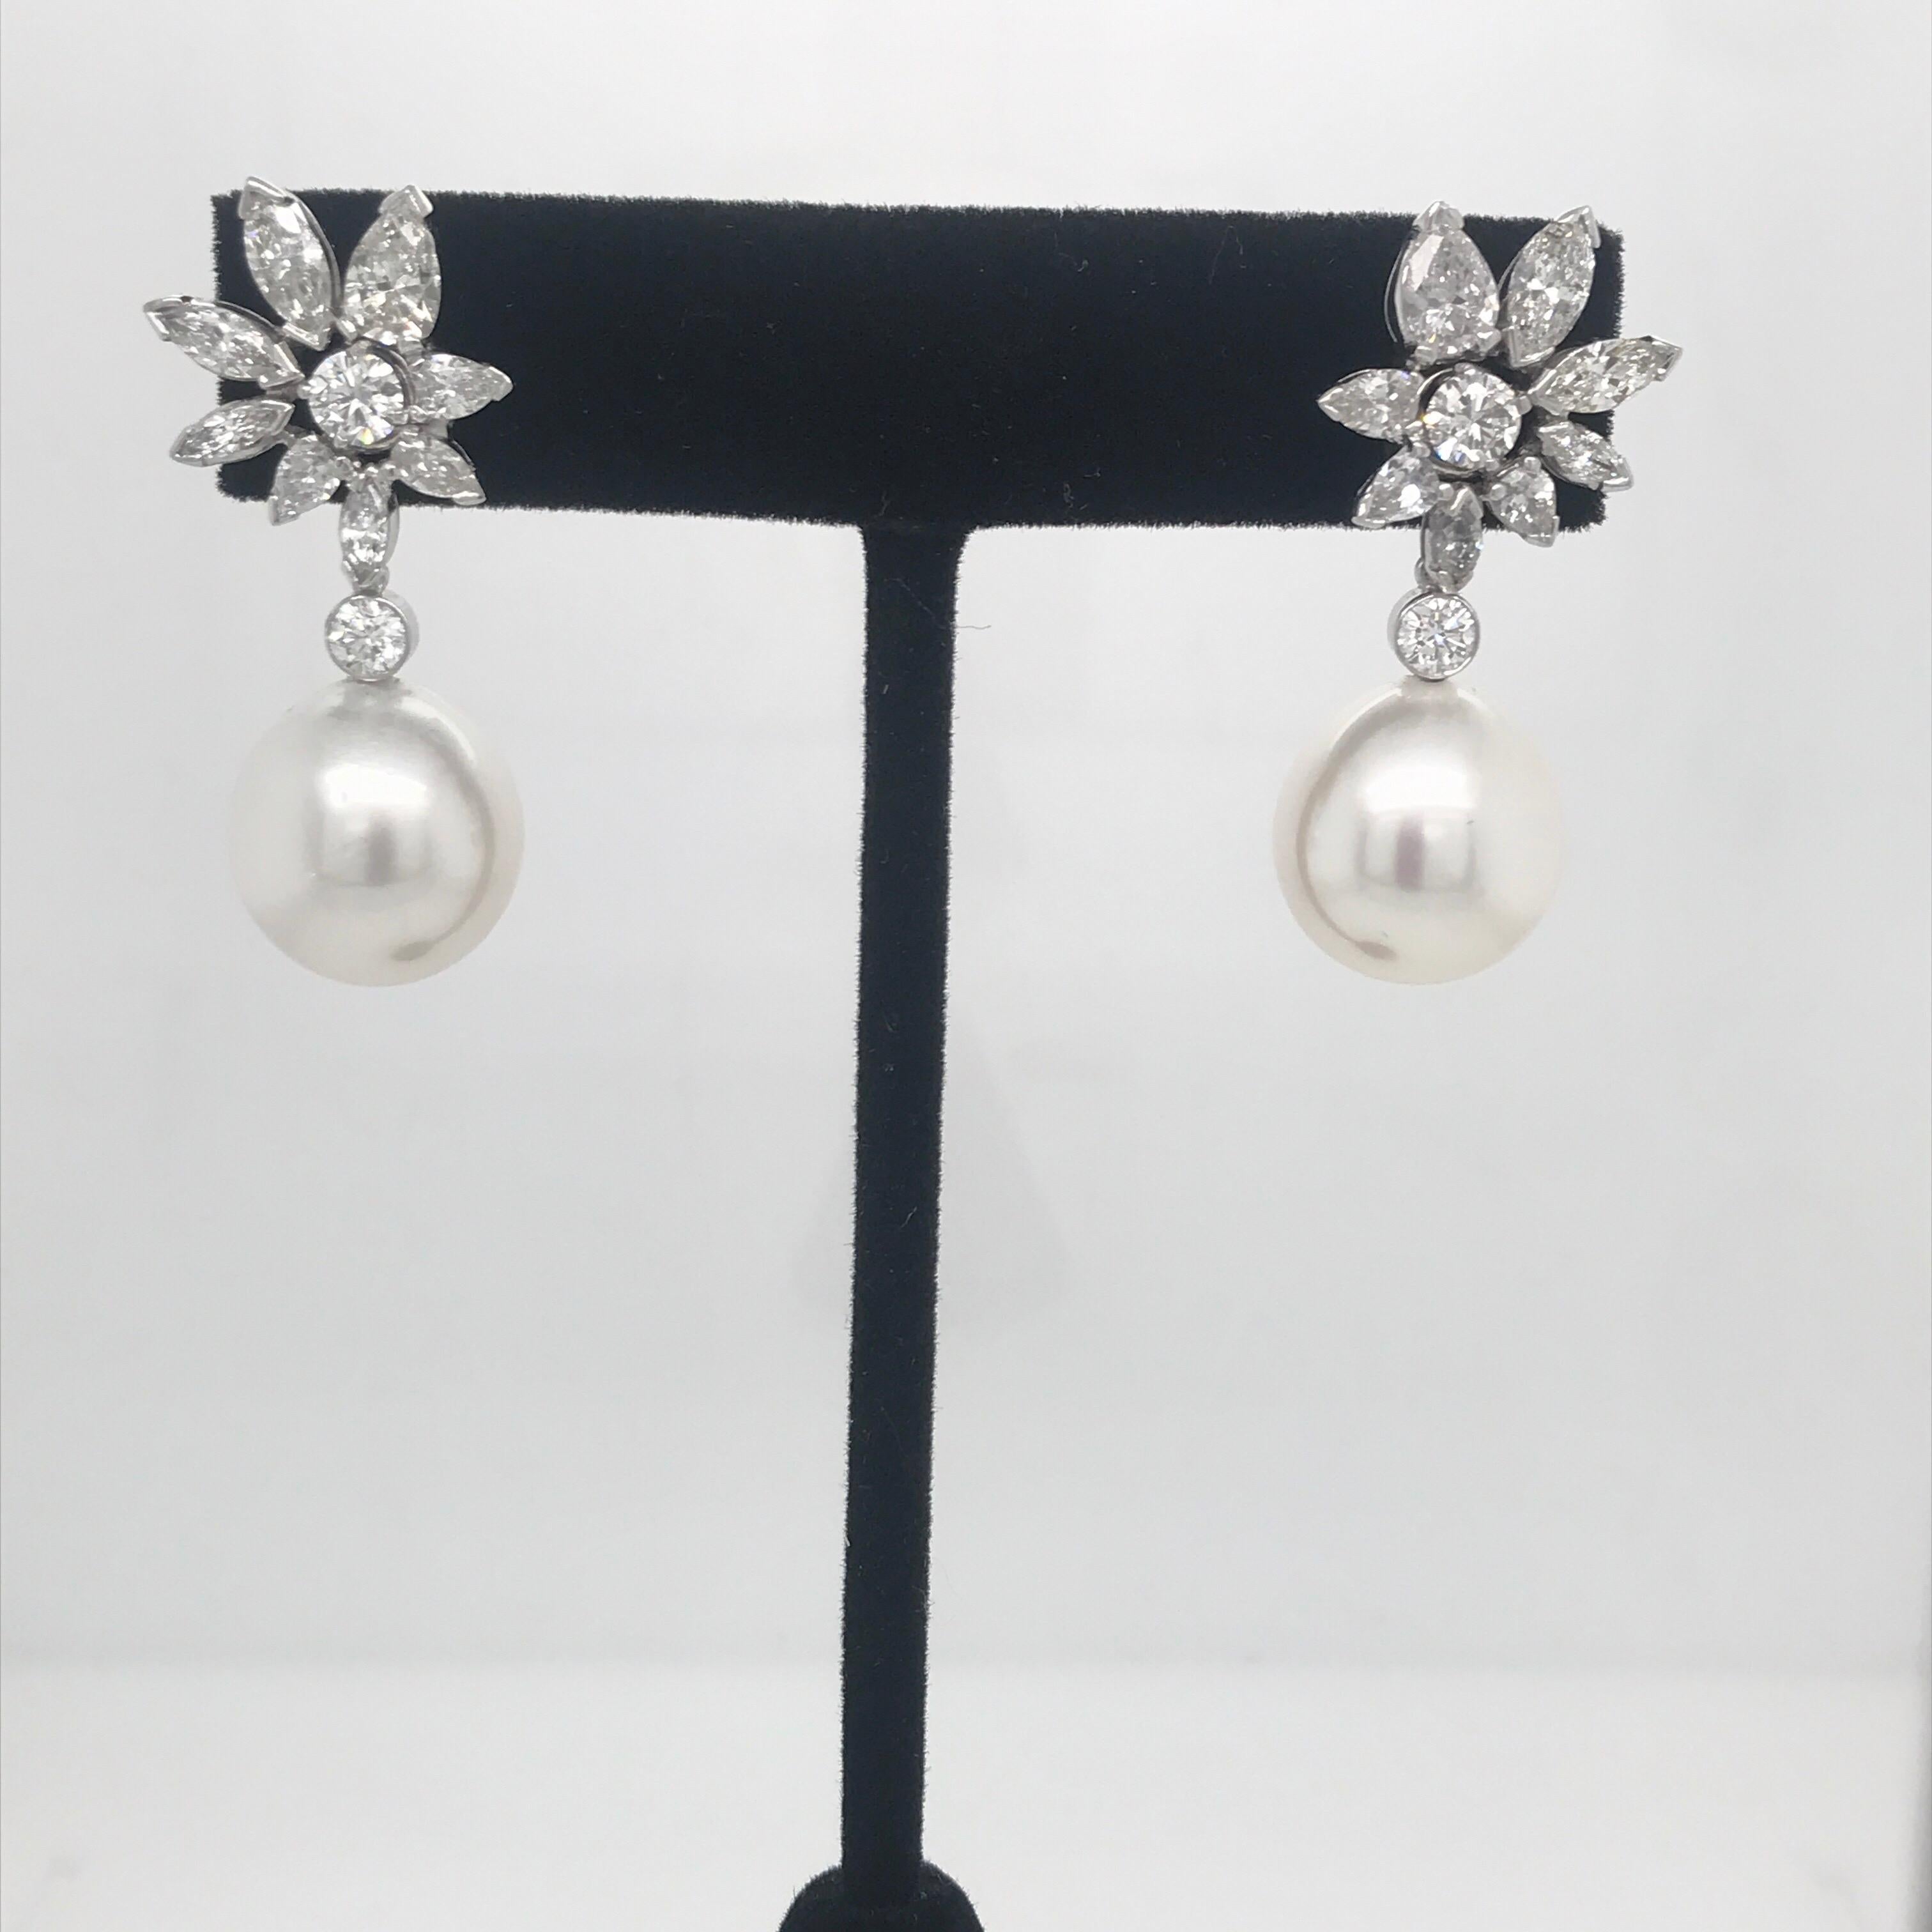 Day & Night Earrings featuring a diamond cluster of pear, marquise and round brilliants weighing 5.06 carats and two South Sea Pearls measuring 13-14 MM, in 14K White Gold. 